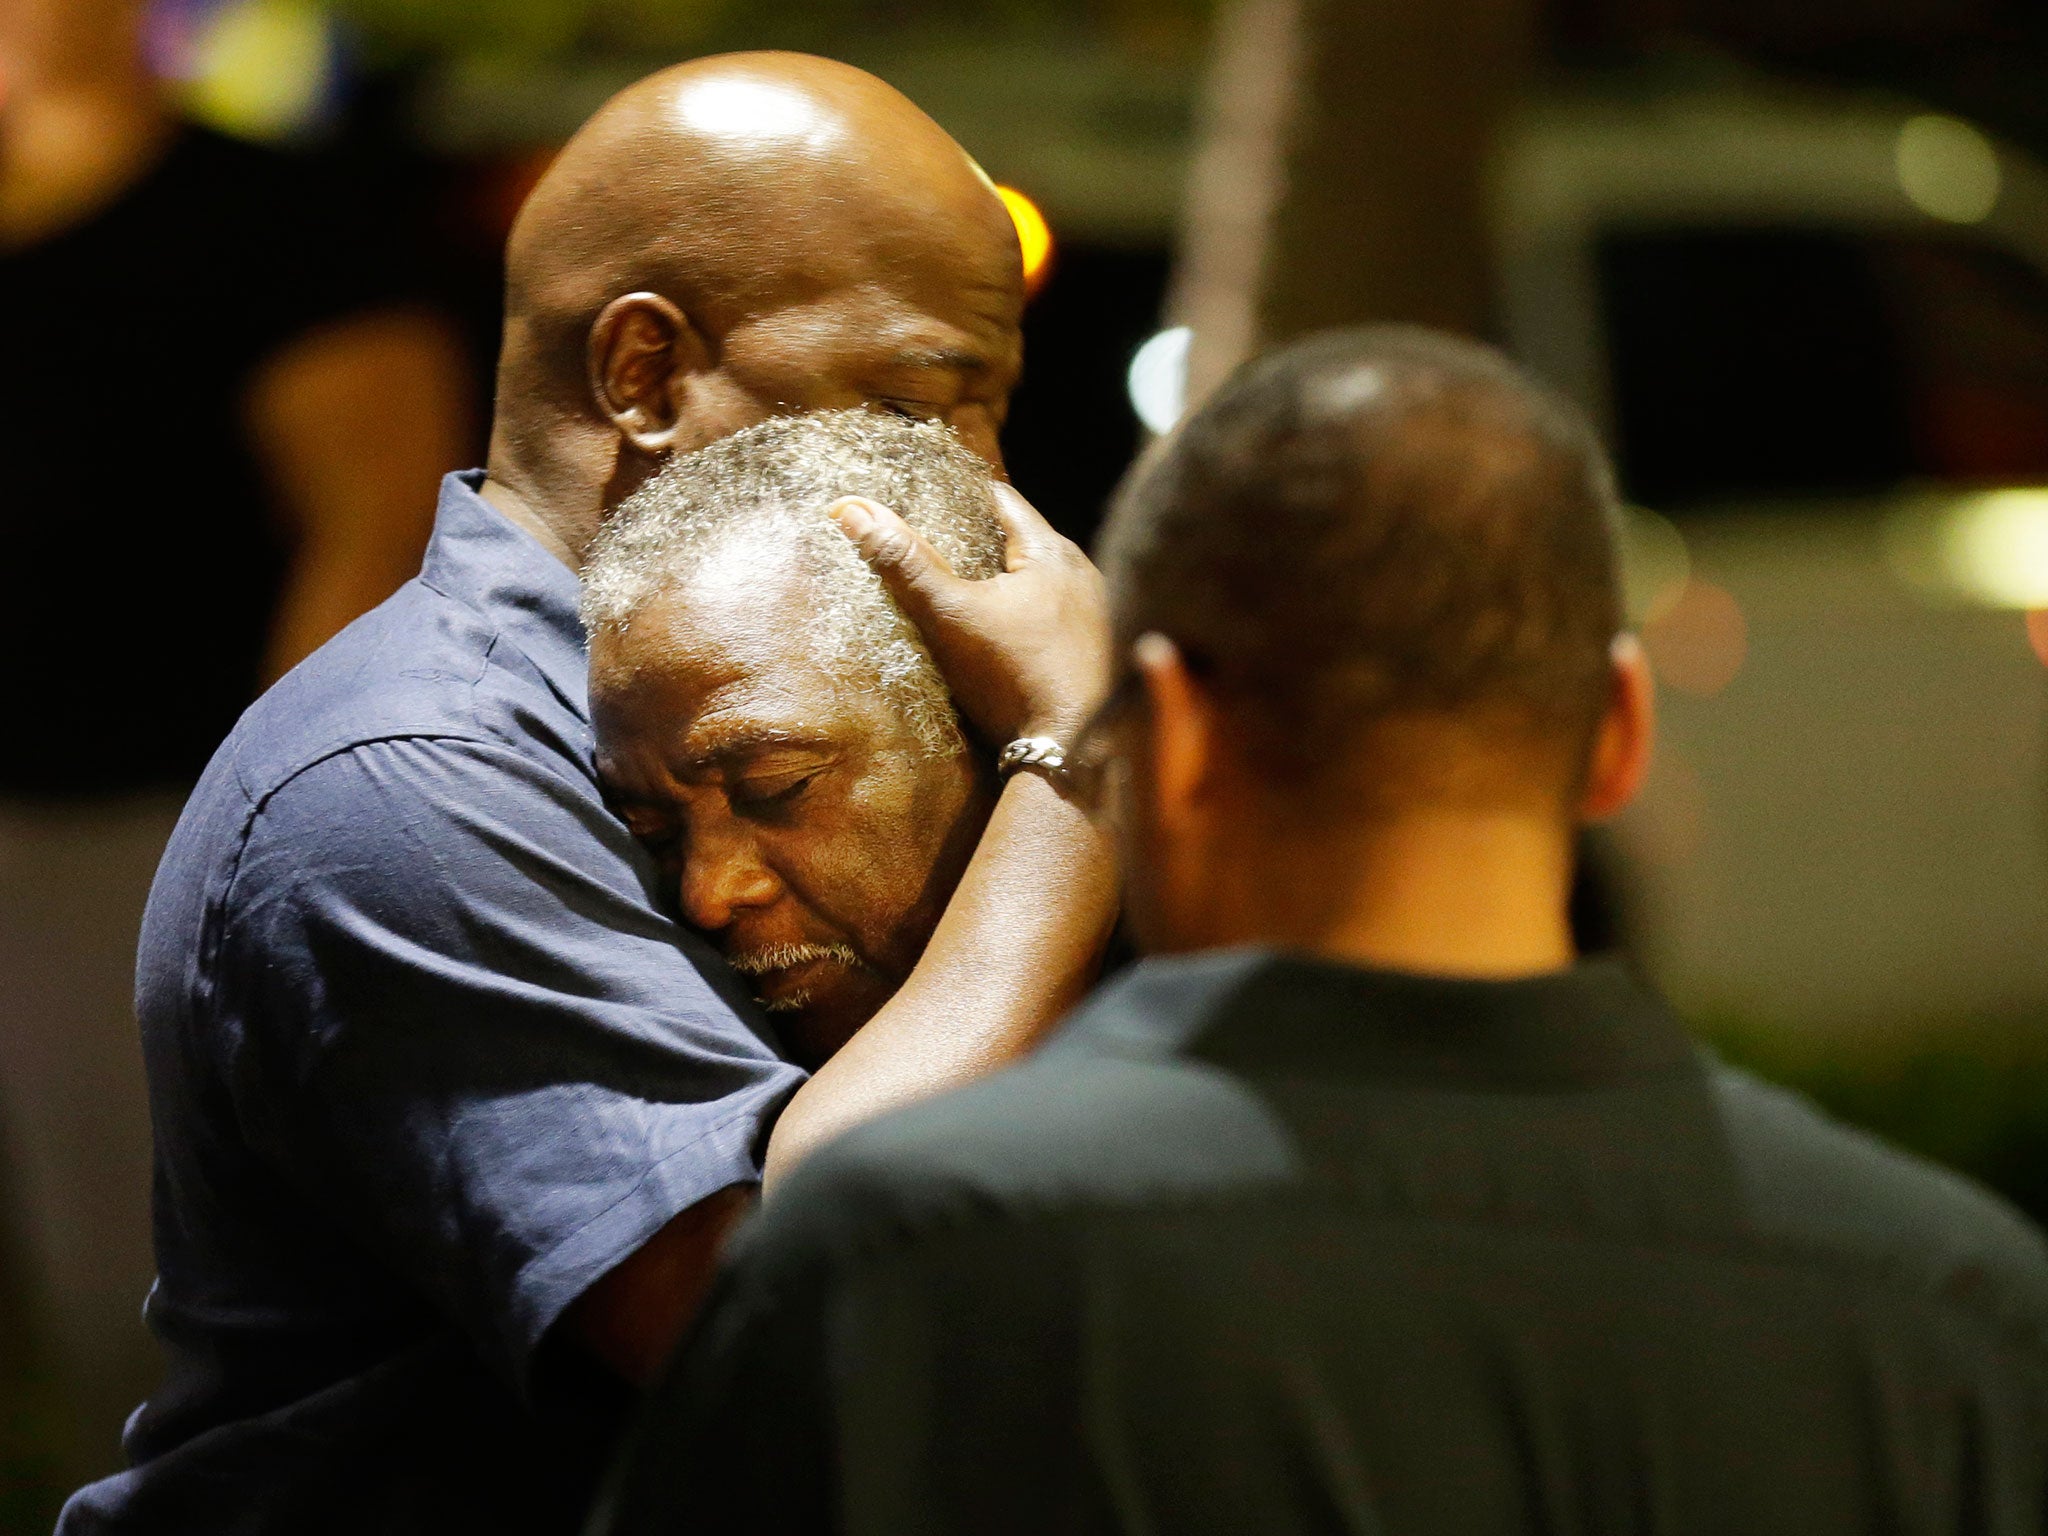 Worshippers embrace following a group prayer across the street from the scene of a shooting